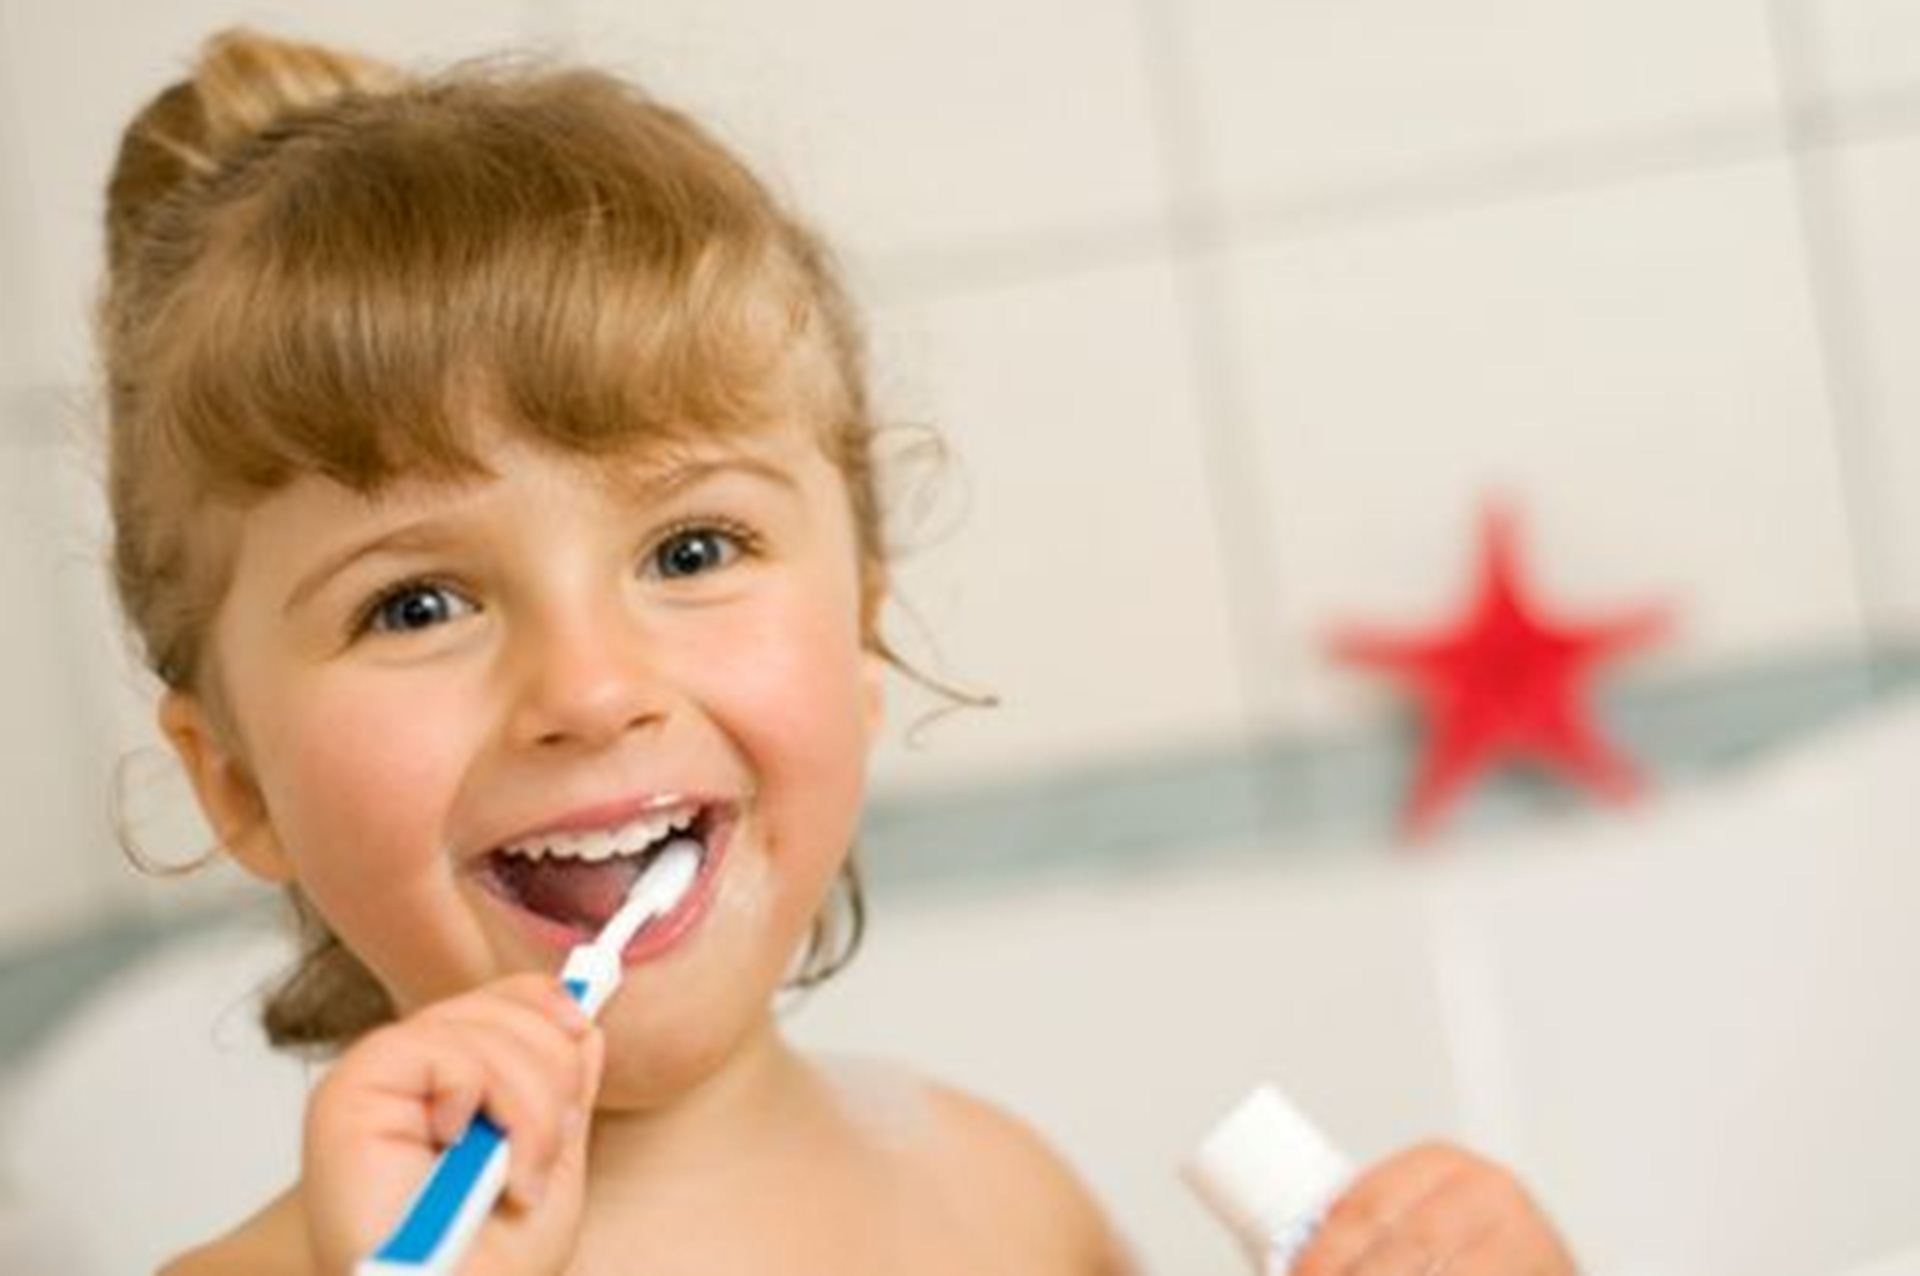 Free photo A little girl brushing her teeth and smiling